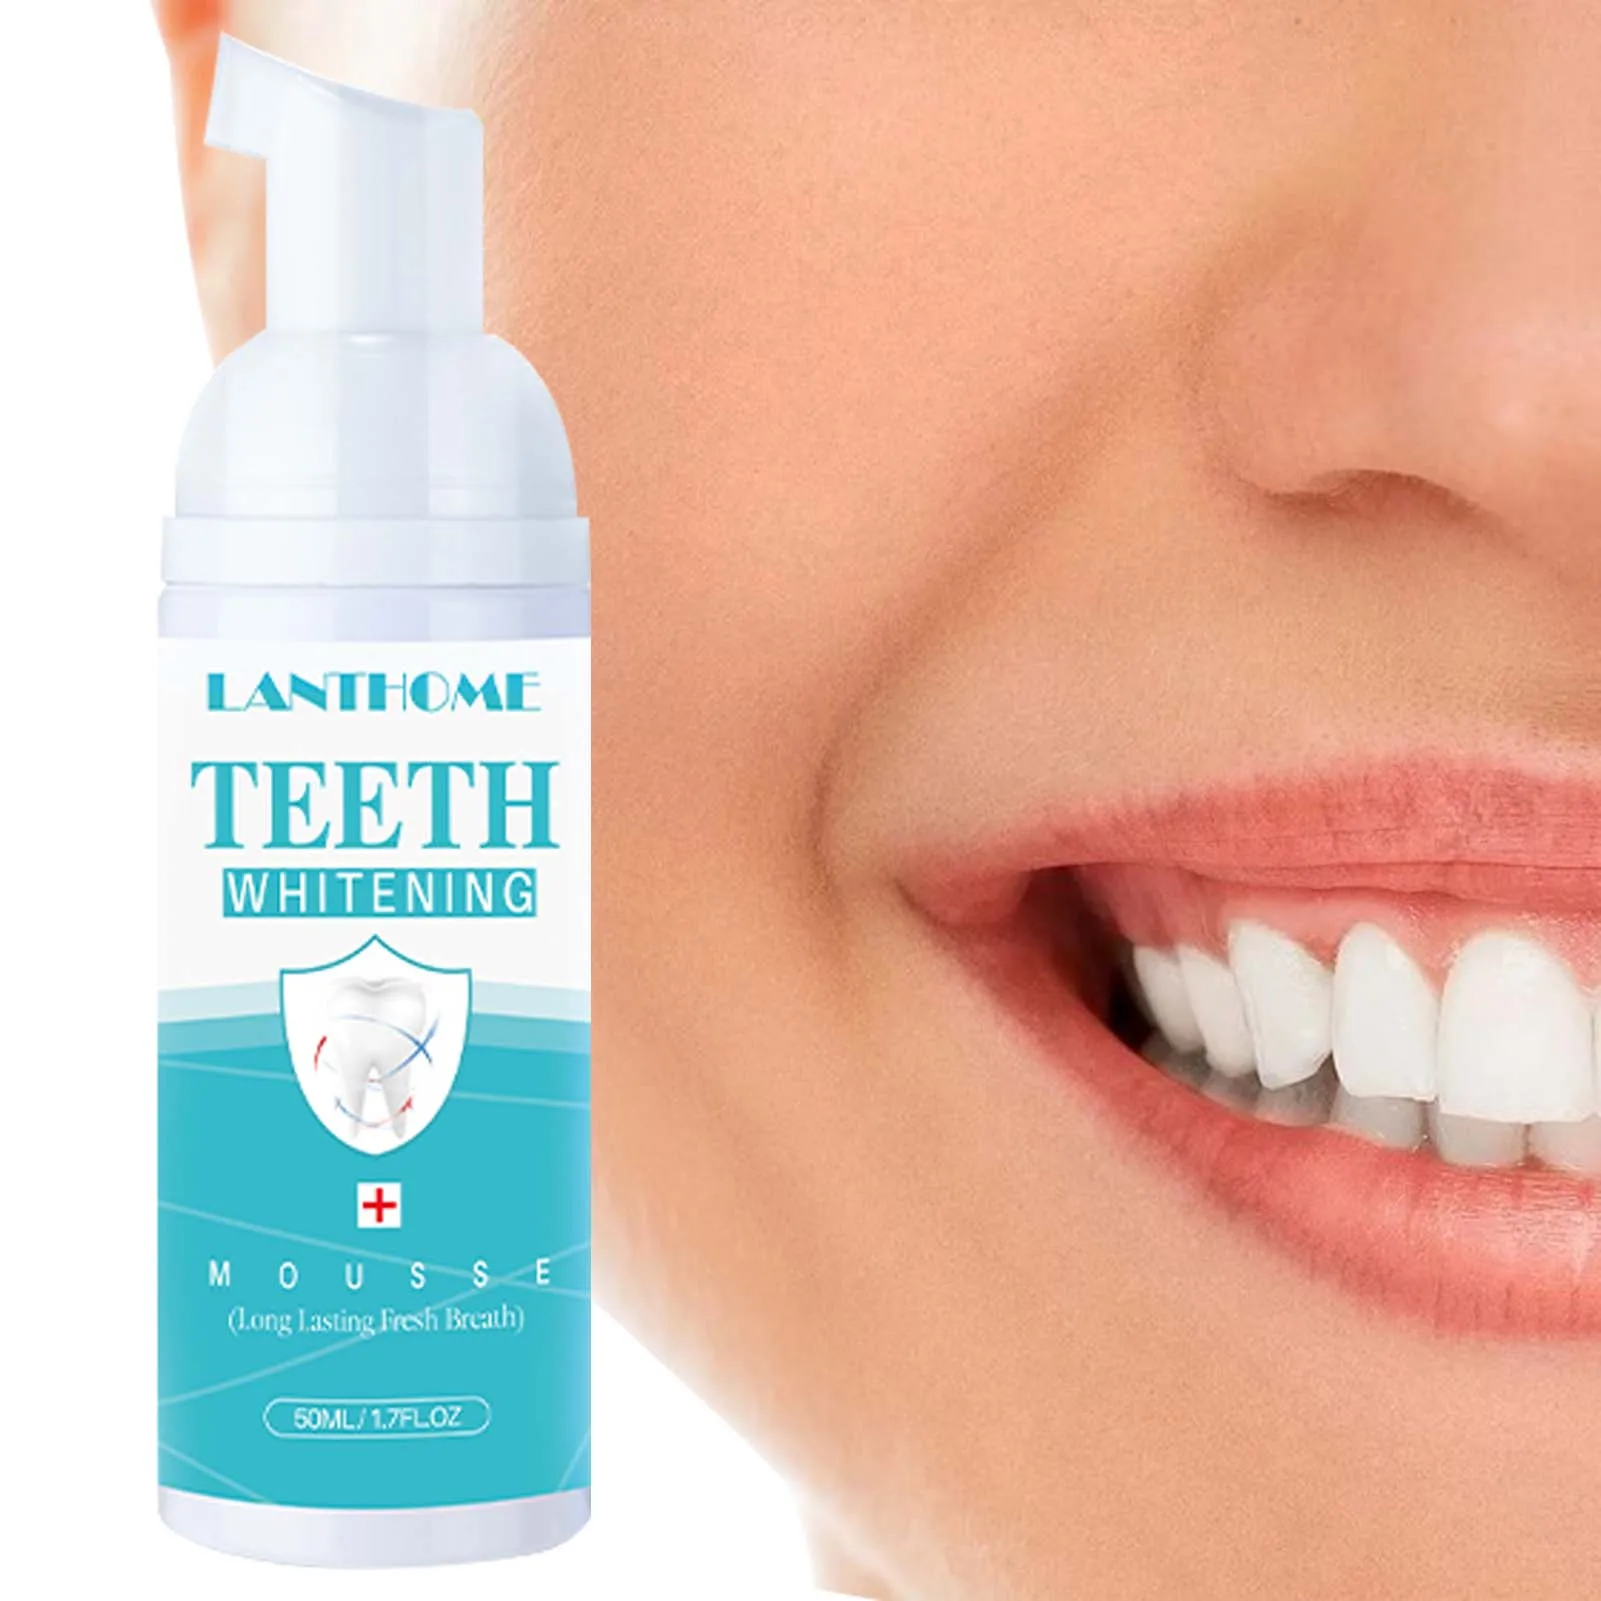 

Toothpaste Whitening Foam Natural Mouth Wash Mousse Teeth Whitening Foam Toothpaste Oral Hygiene Breath Dental Tool 50ml